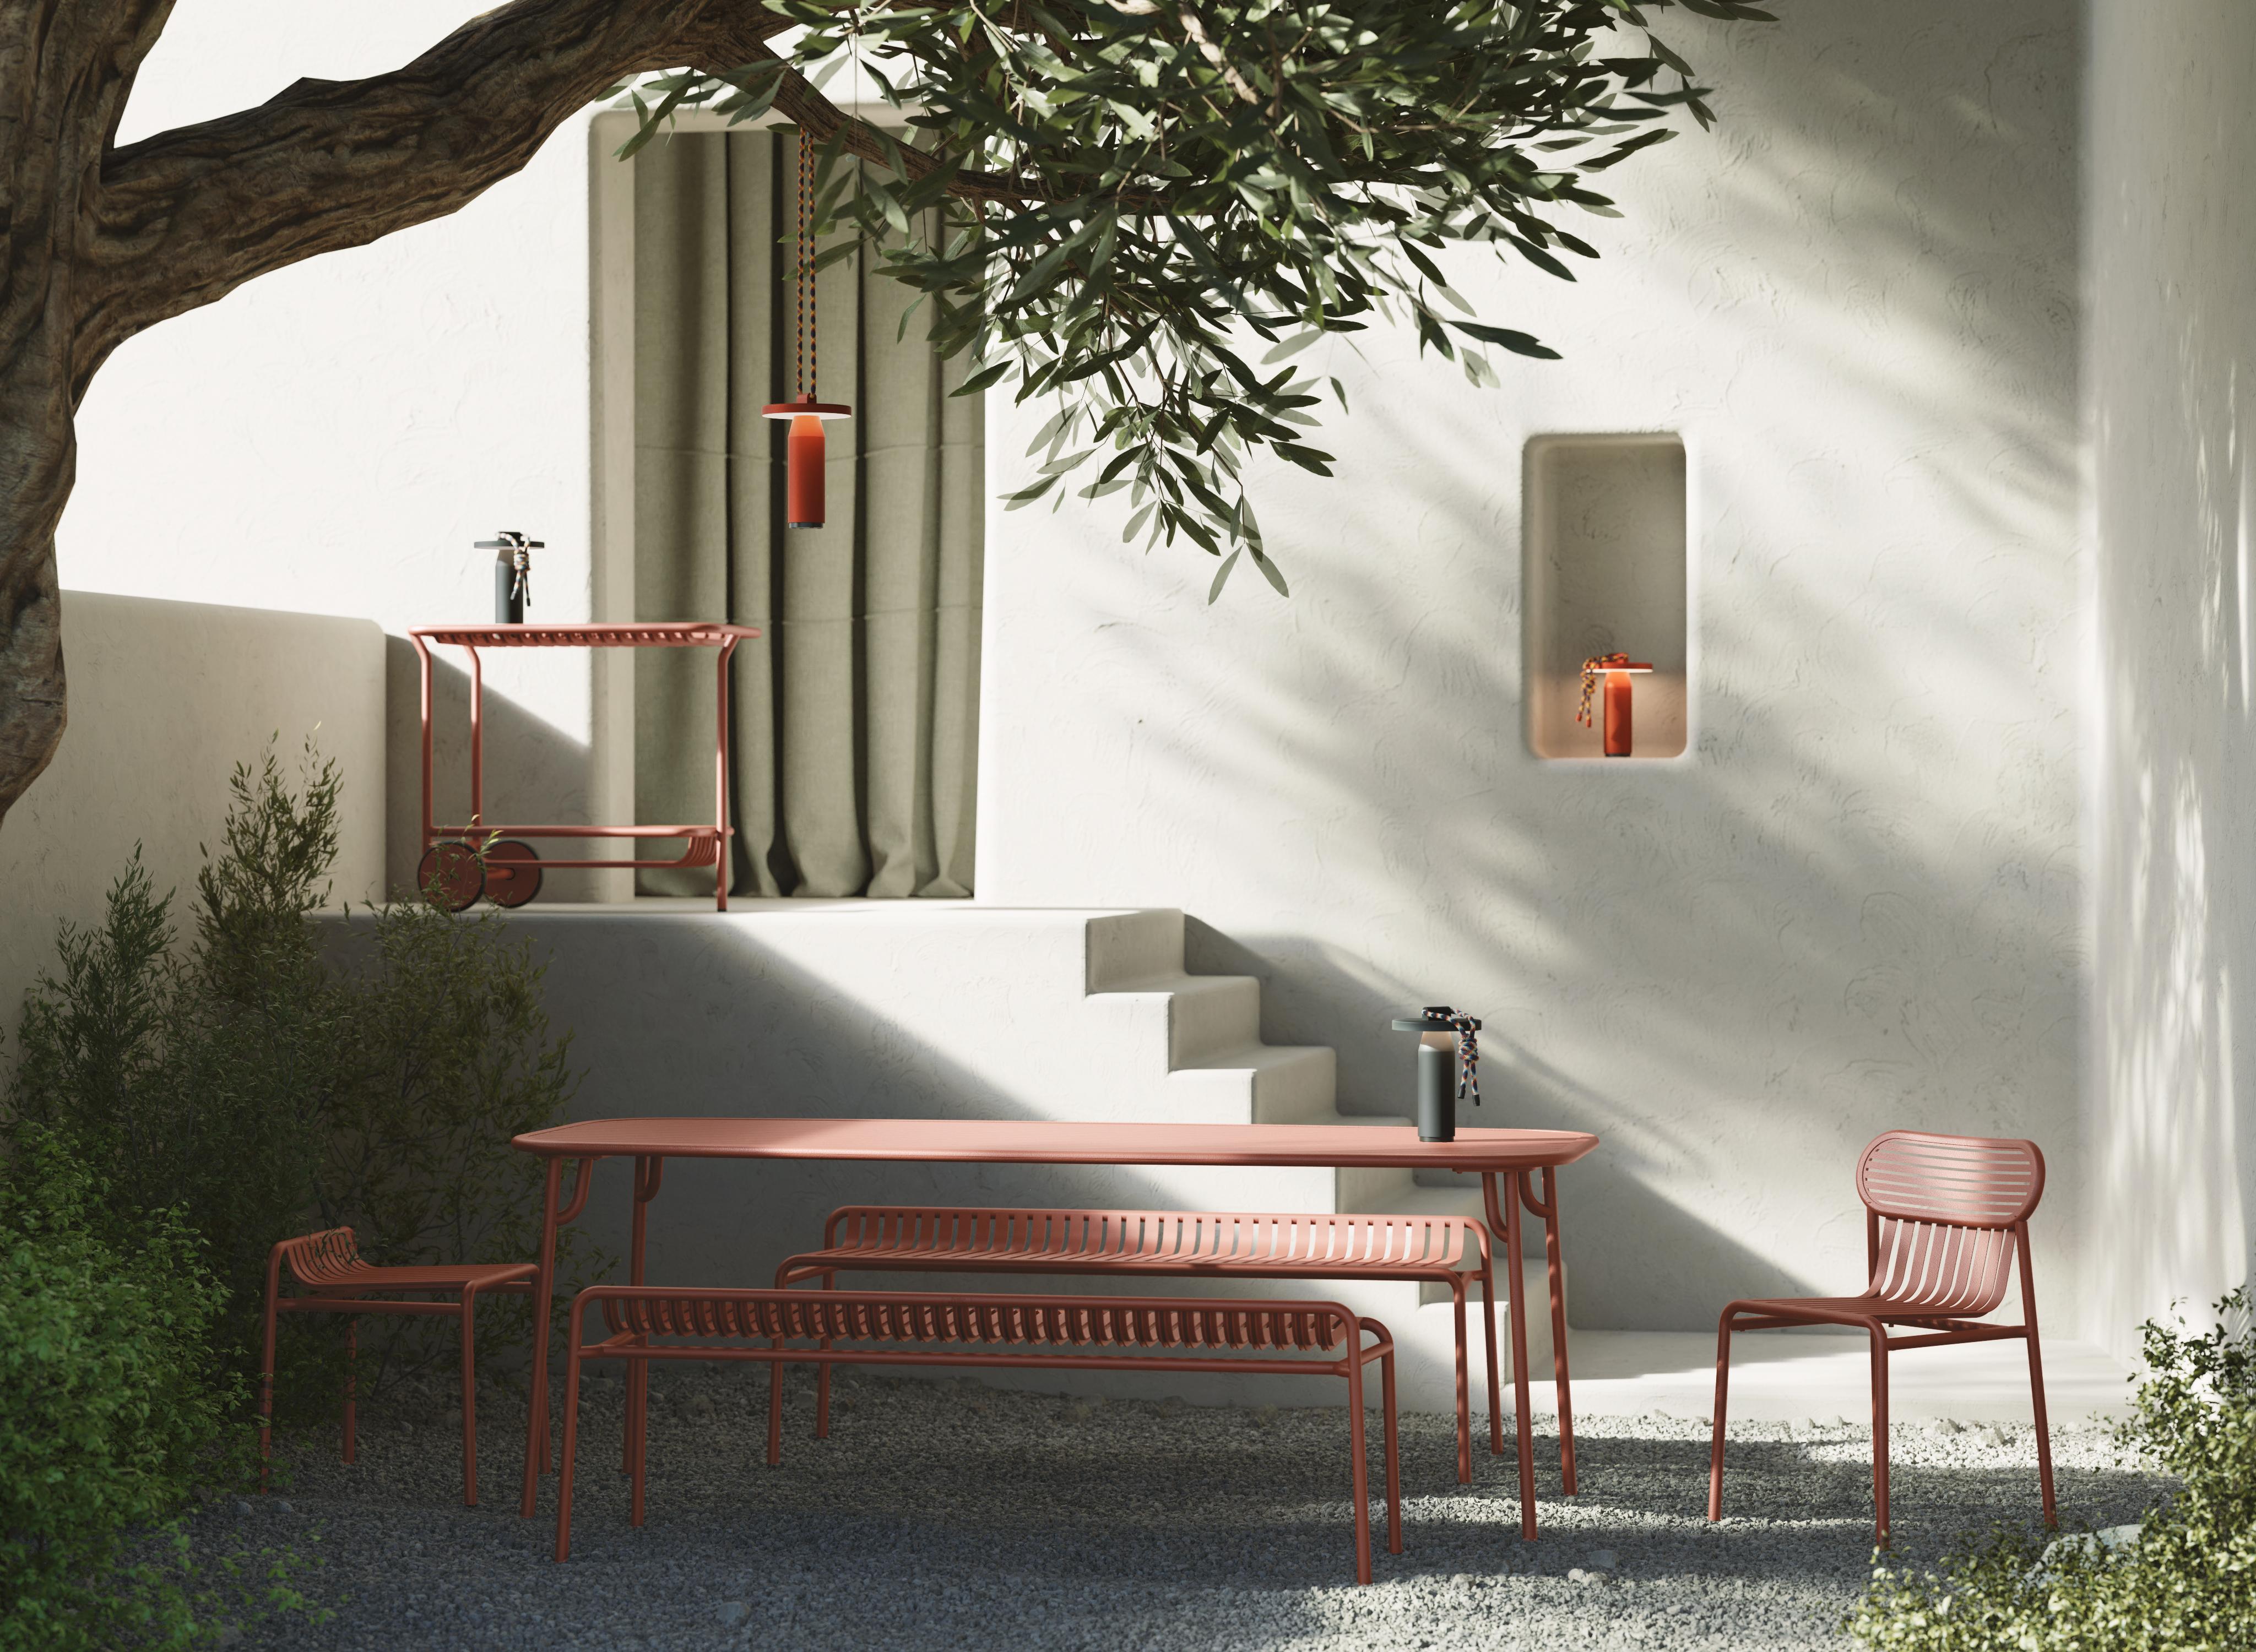 Petite Friture Week-End Large Plain Rectangular Dining Table in Coral Aluminium by Studio BrichetZiegler, 2017

The week-end collection is a full range of outdoor furniture, in aluminium grained epoxy paint, matt finish, that includes 18 functions